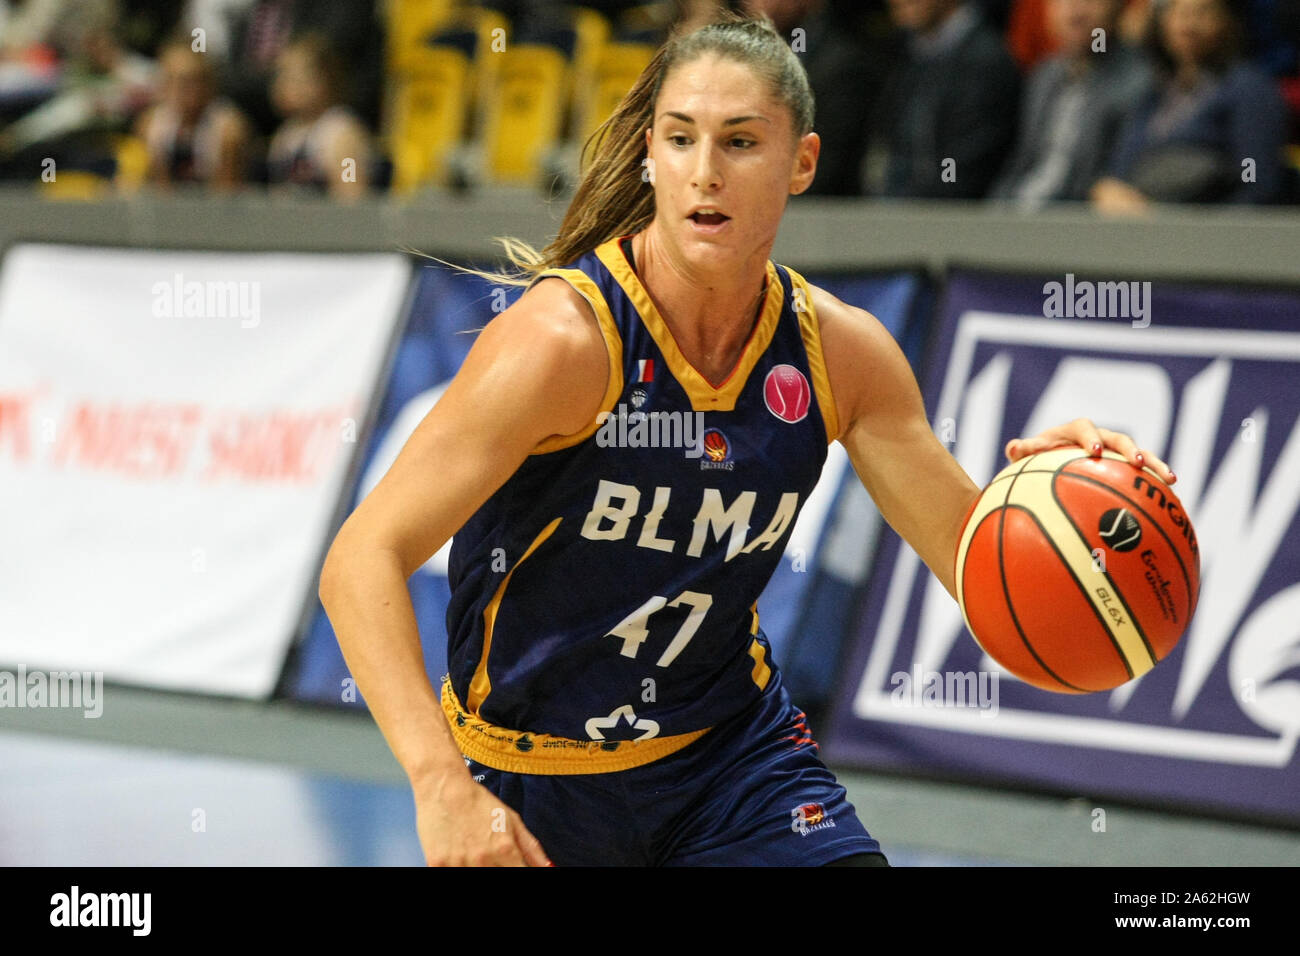 Gdynia, Poland. , . Romane Bernies (47) of BLMA is seen in action during  Euroleague woman basketball game between Arka Gdynia (Poland) and Basket  Lattes Montpellier Association (France) in Gdynia, Poland on